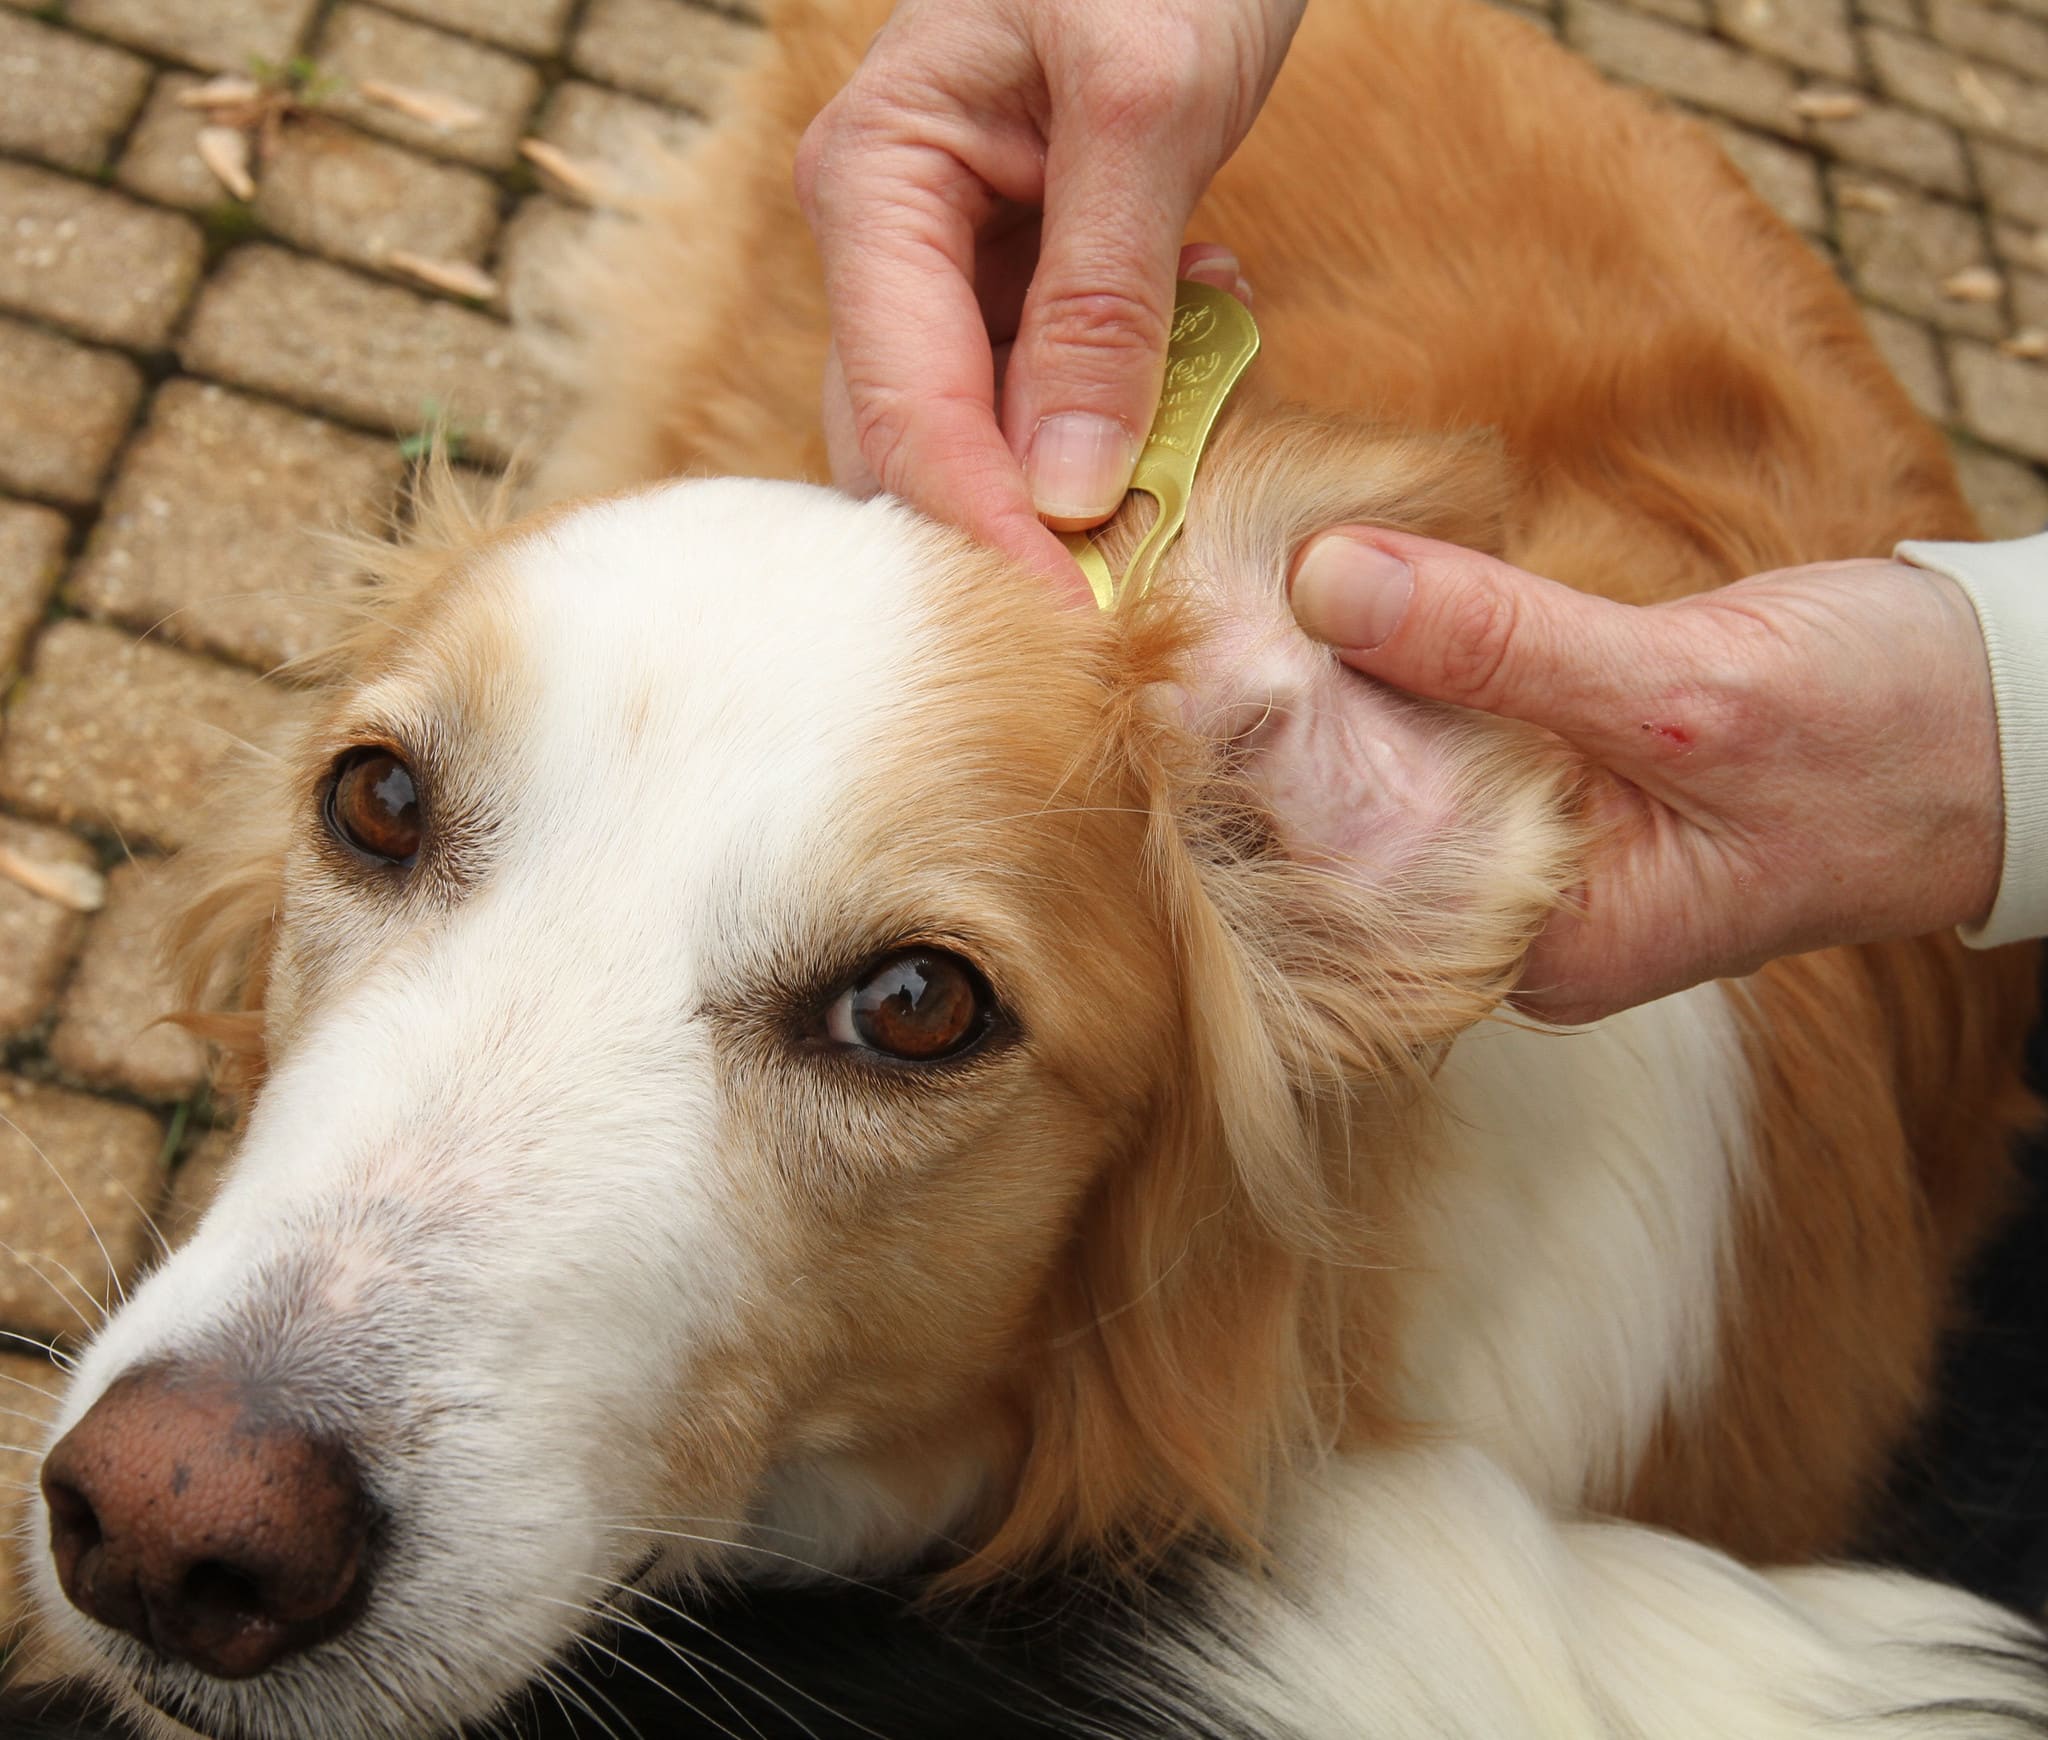 How Can I Tell If My Dog Has Lyme Disease